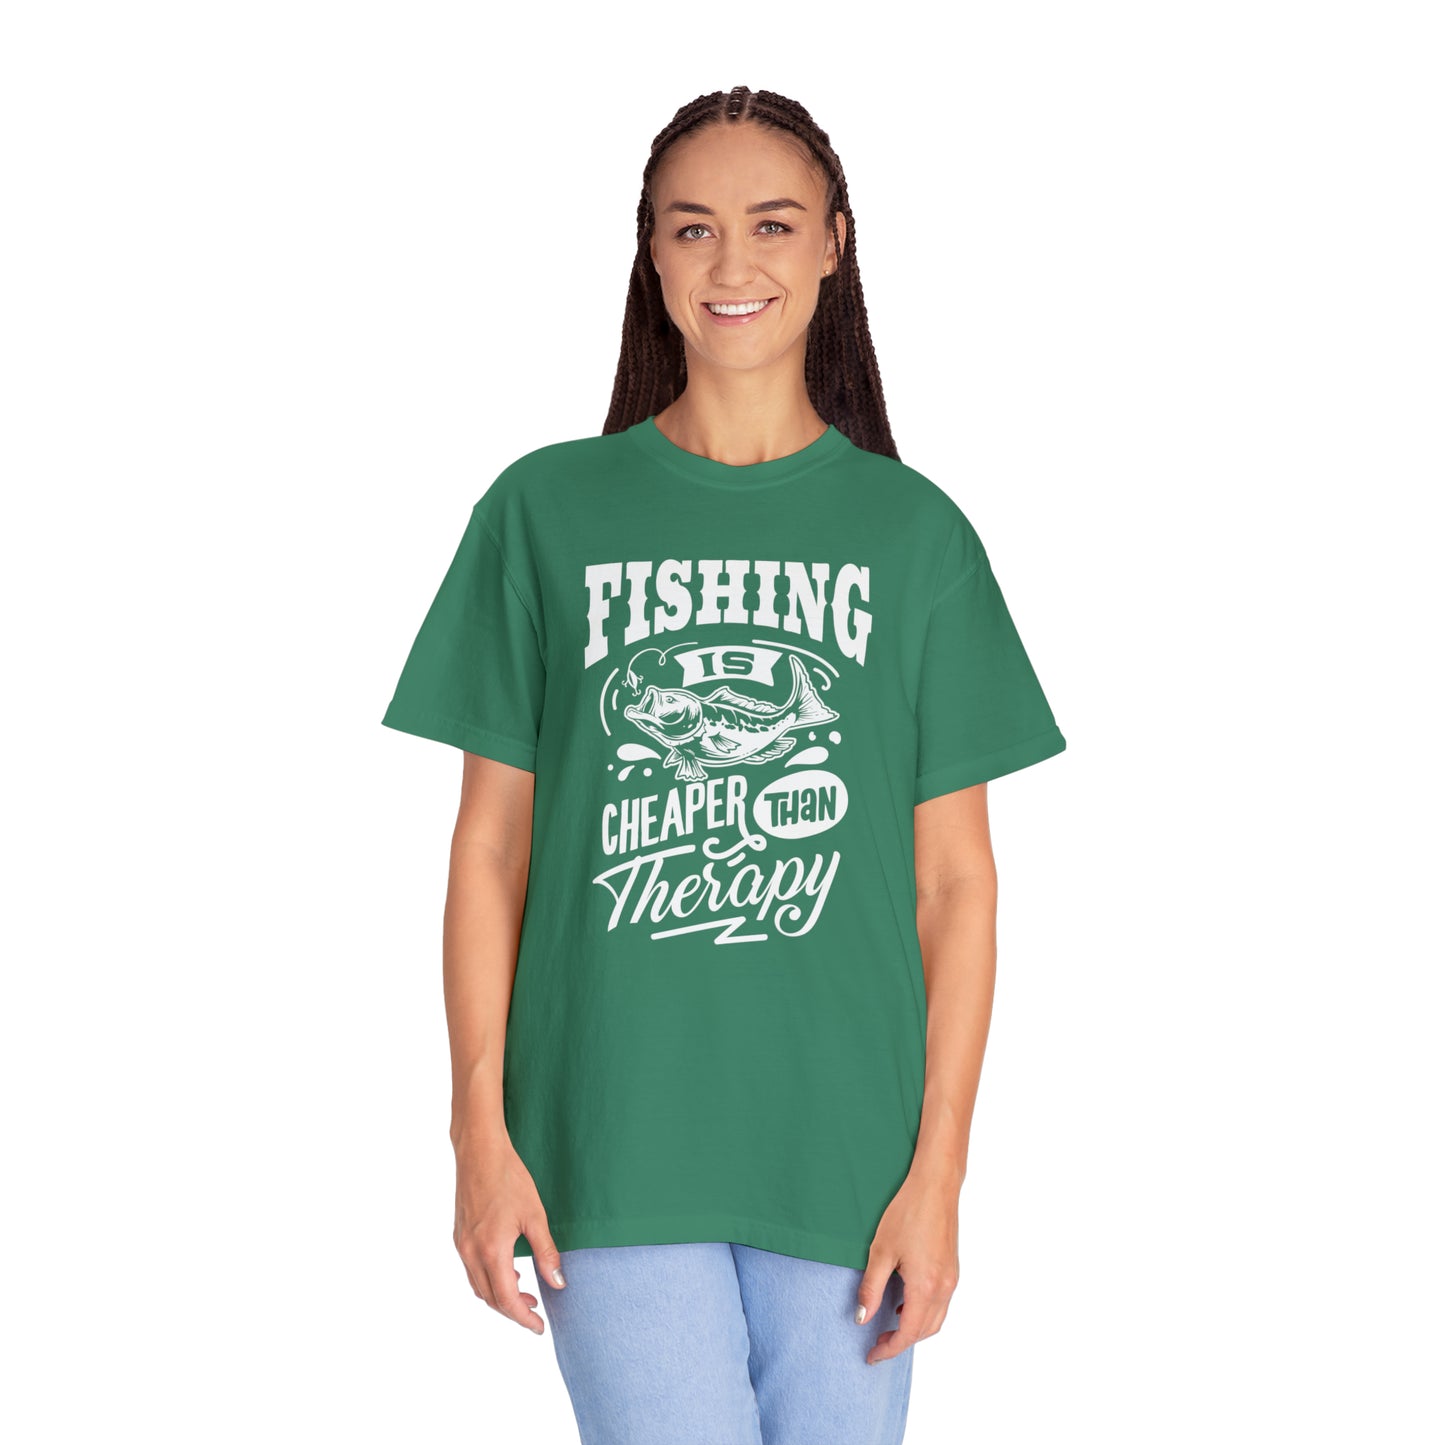 Reel in Tranquility: Fishing Therapy T-Shirt